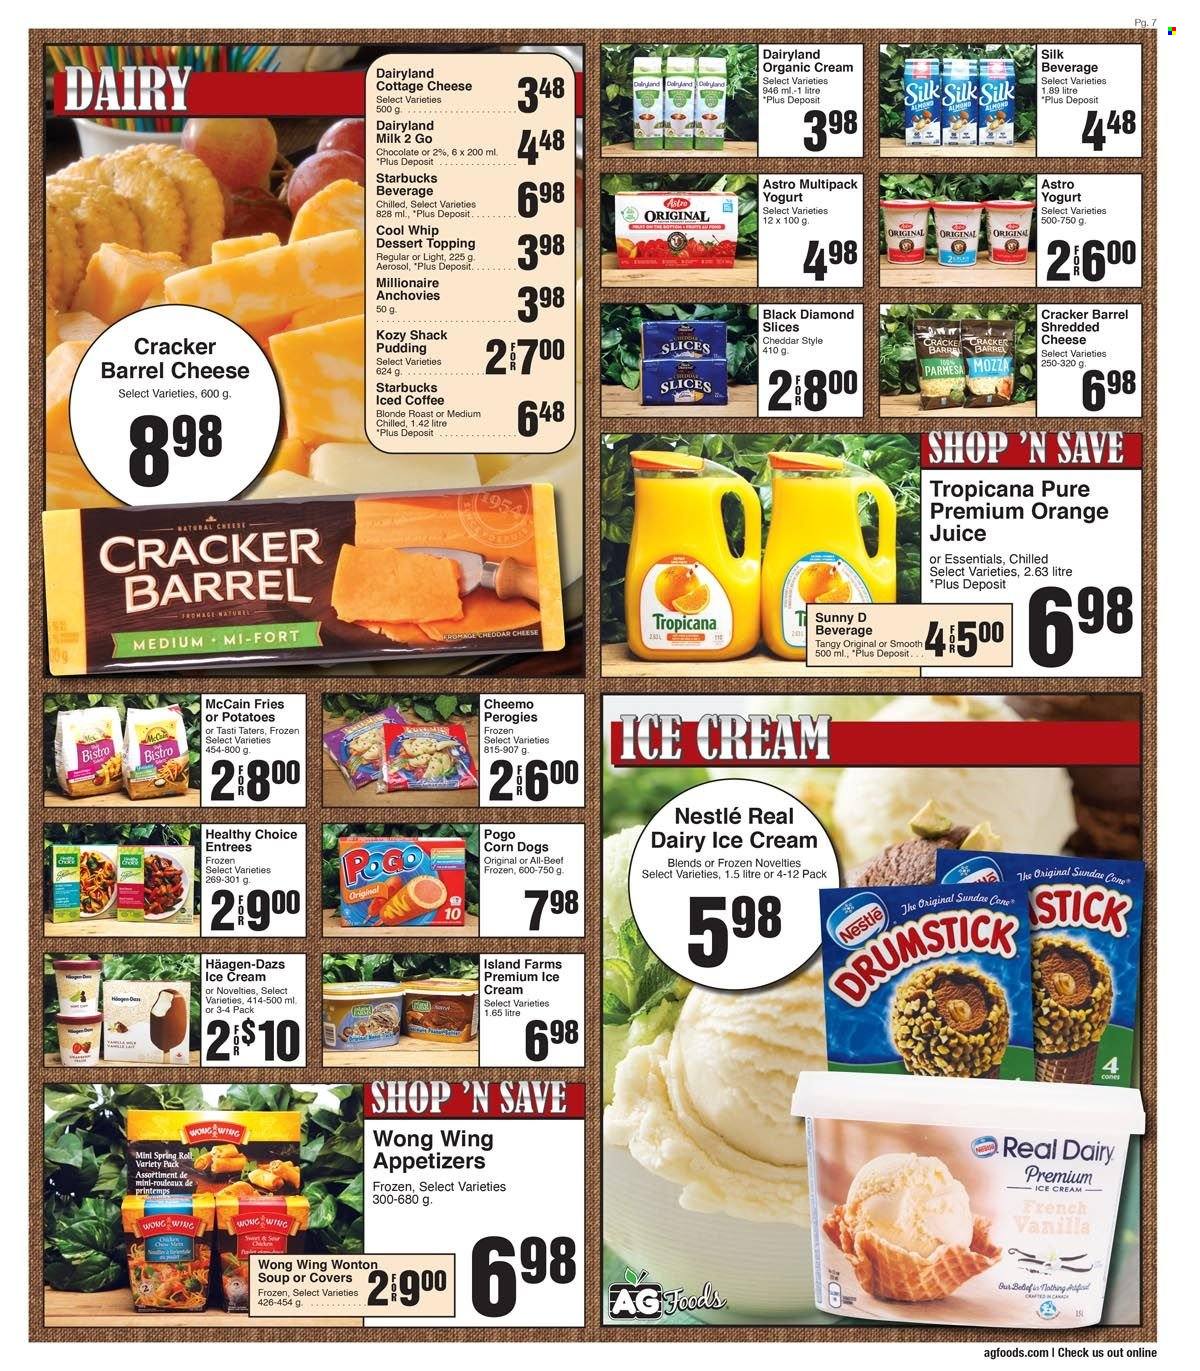 thumbnail - AG Foods Flyer - May 22, 2022 - May 28, 2022 - Sales products - potatoes, soup, Healthy Choice, cottage cheese, shredded cheese, cheddar, pudding, yoghurt, milk, Silk, Cool Whip, ice cream, Häagen-Dazs, McCain, potato fries, crackers, topping, anchovies, orange juice, juice, iced coffee, Starbucks, Nestlé. Page 7.